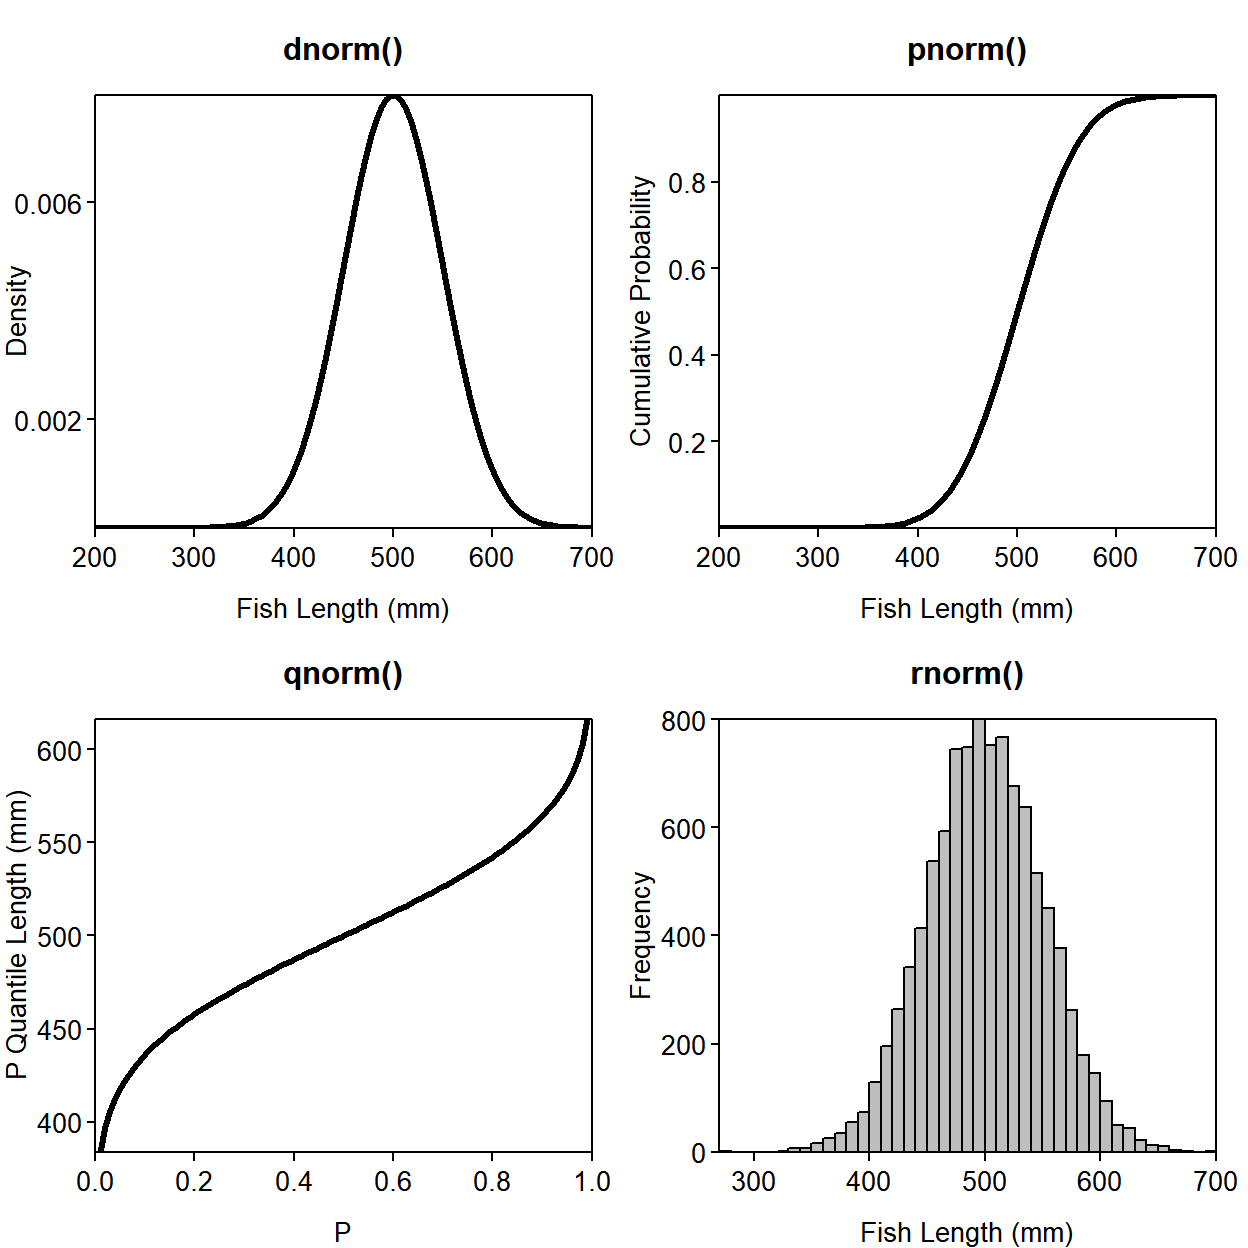 The four `-norm` functions with input (x-axis) and output (y-axis) displayed.